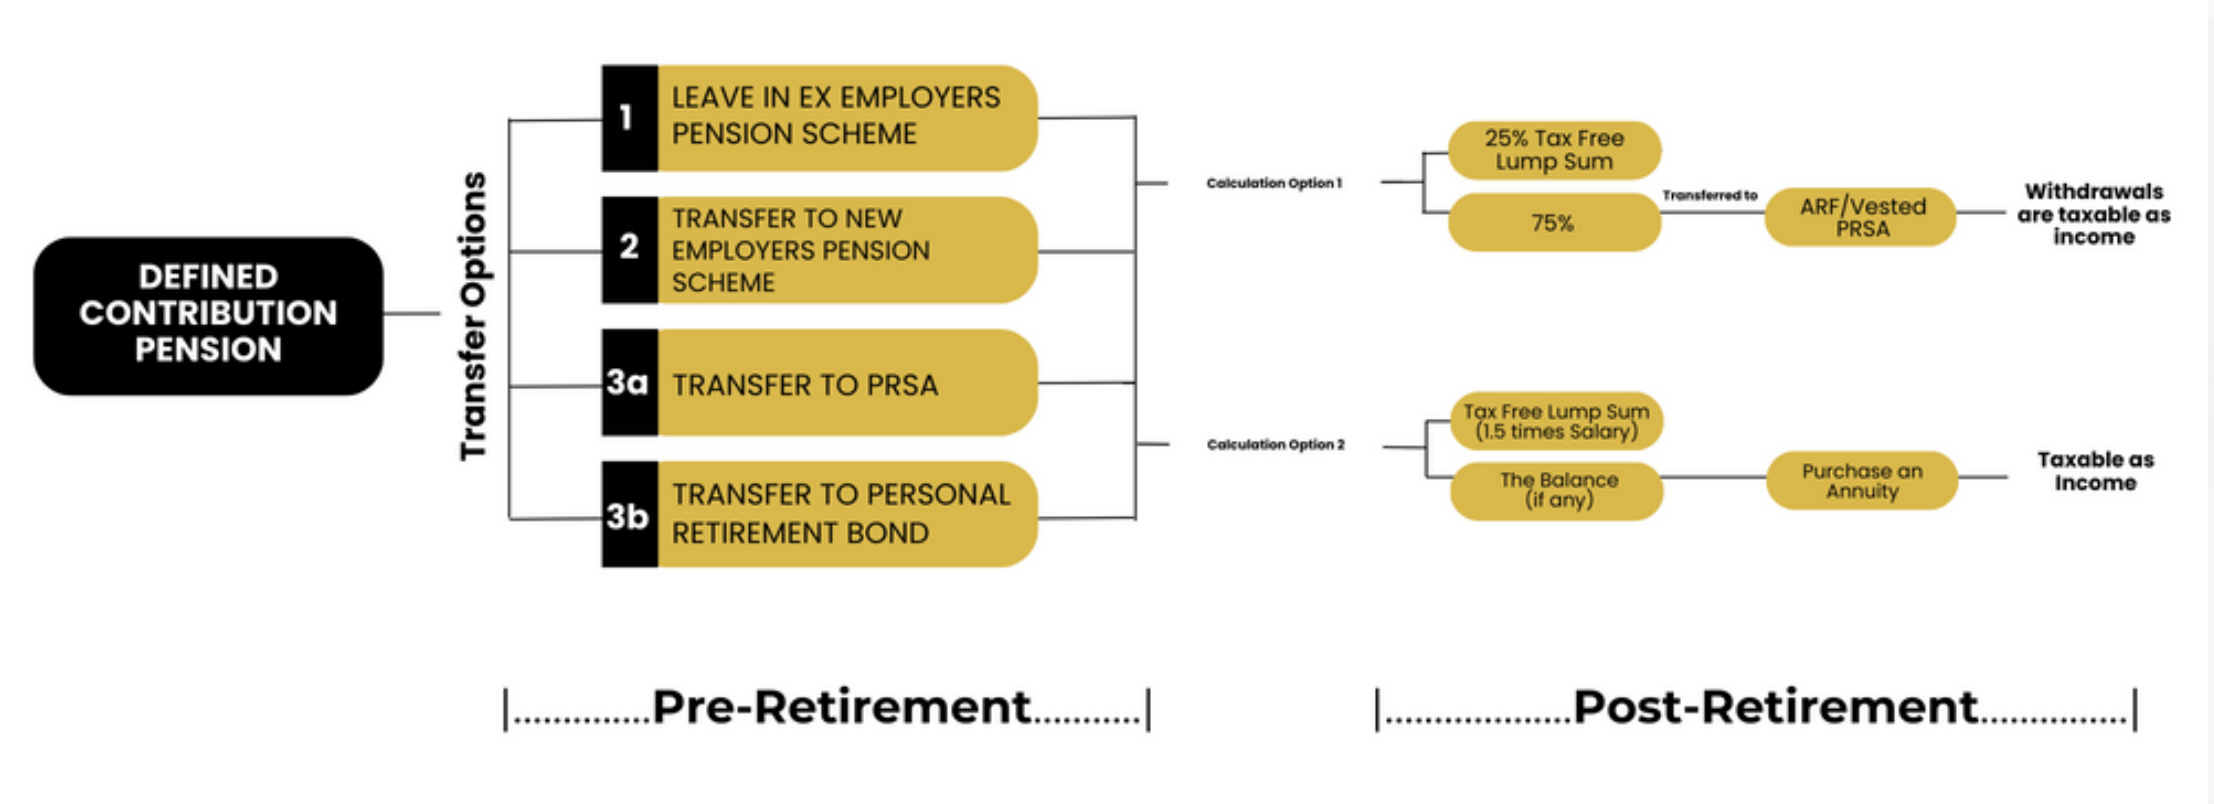 Defined Contribution Pension